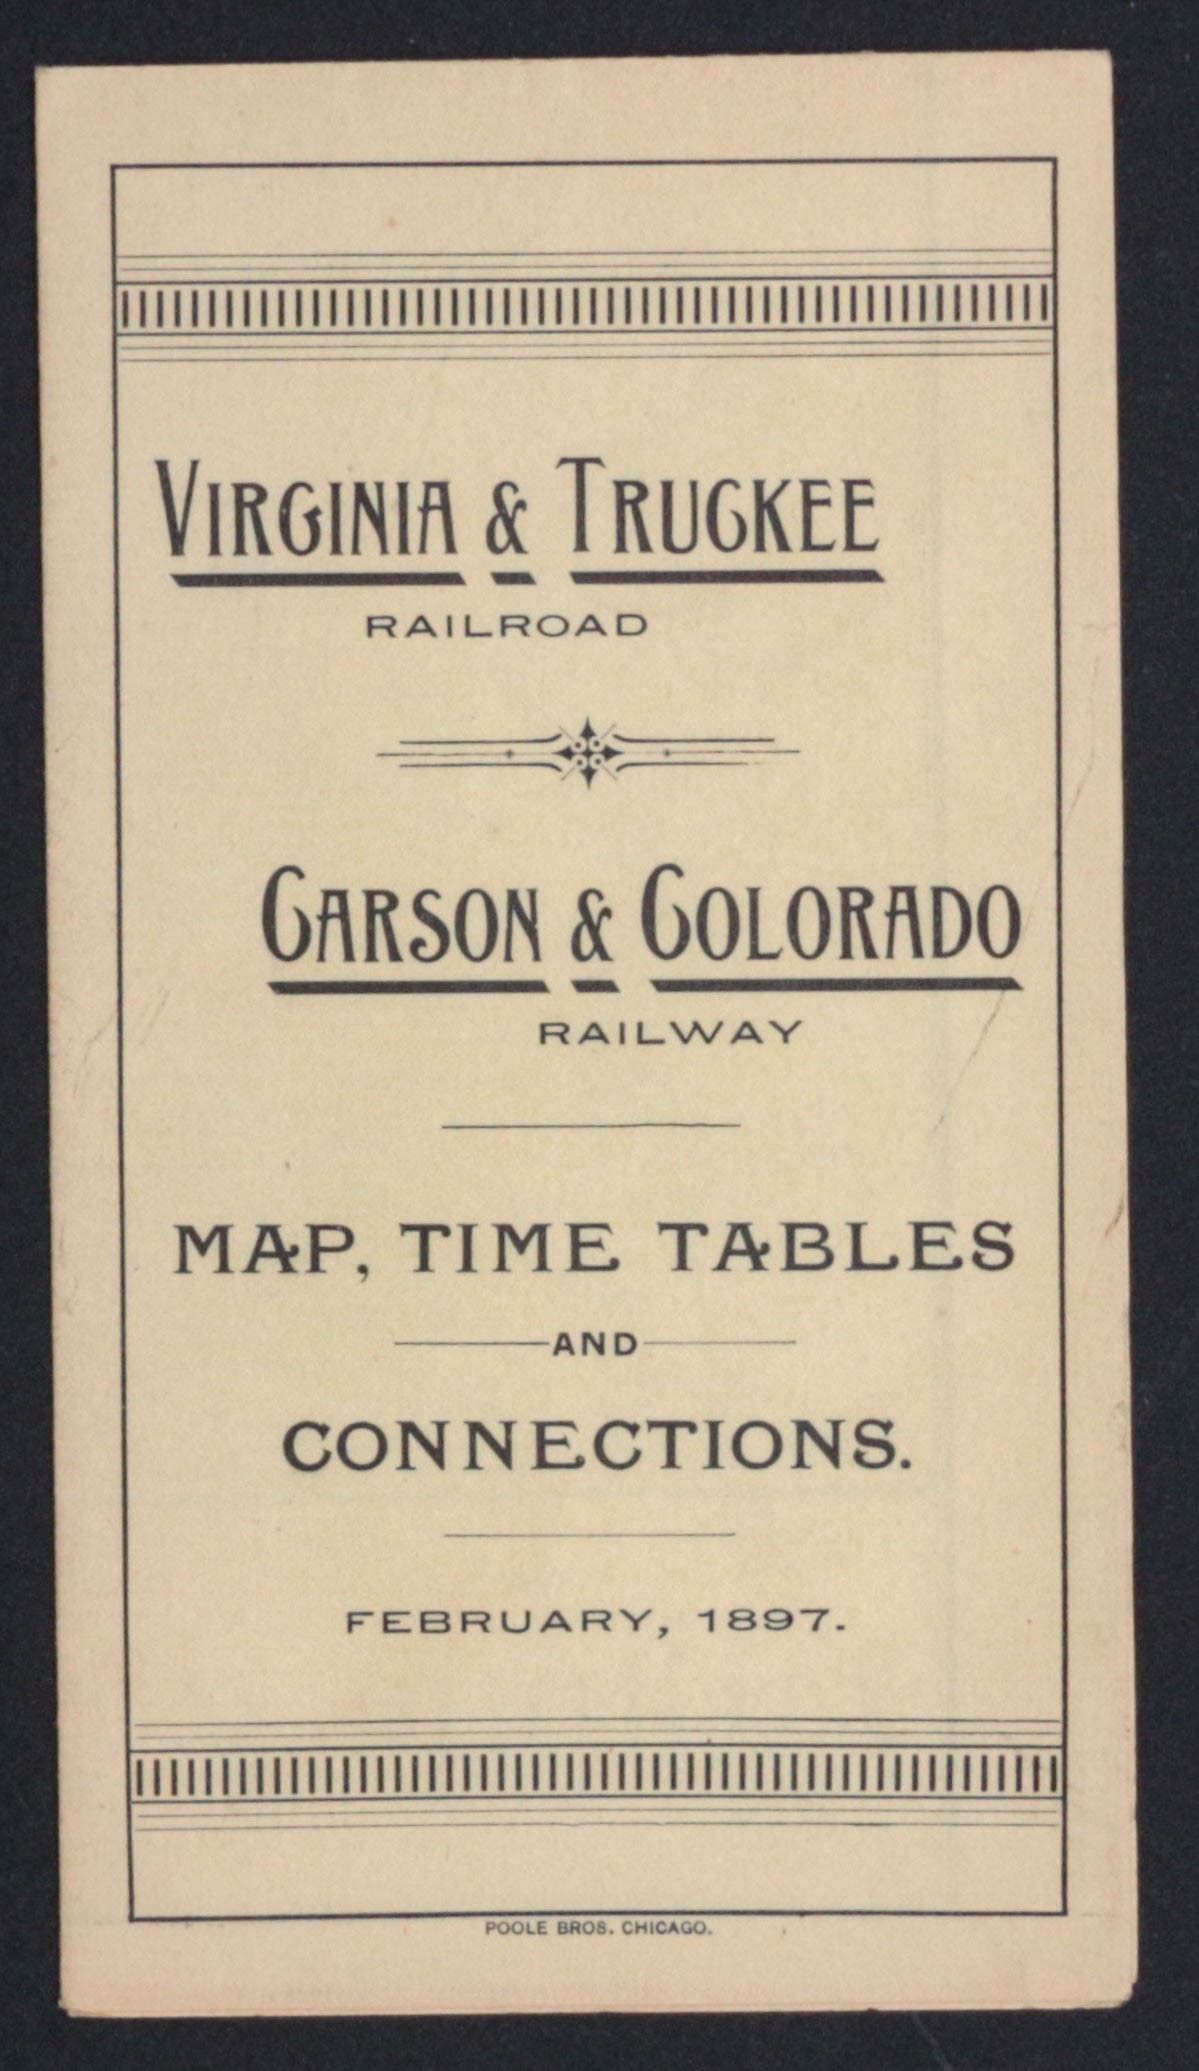 VIR. & TRUCKEE RR AND CARSON & COLO. RR TIMETABLE 1897